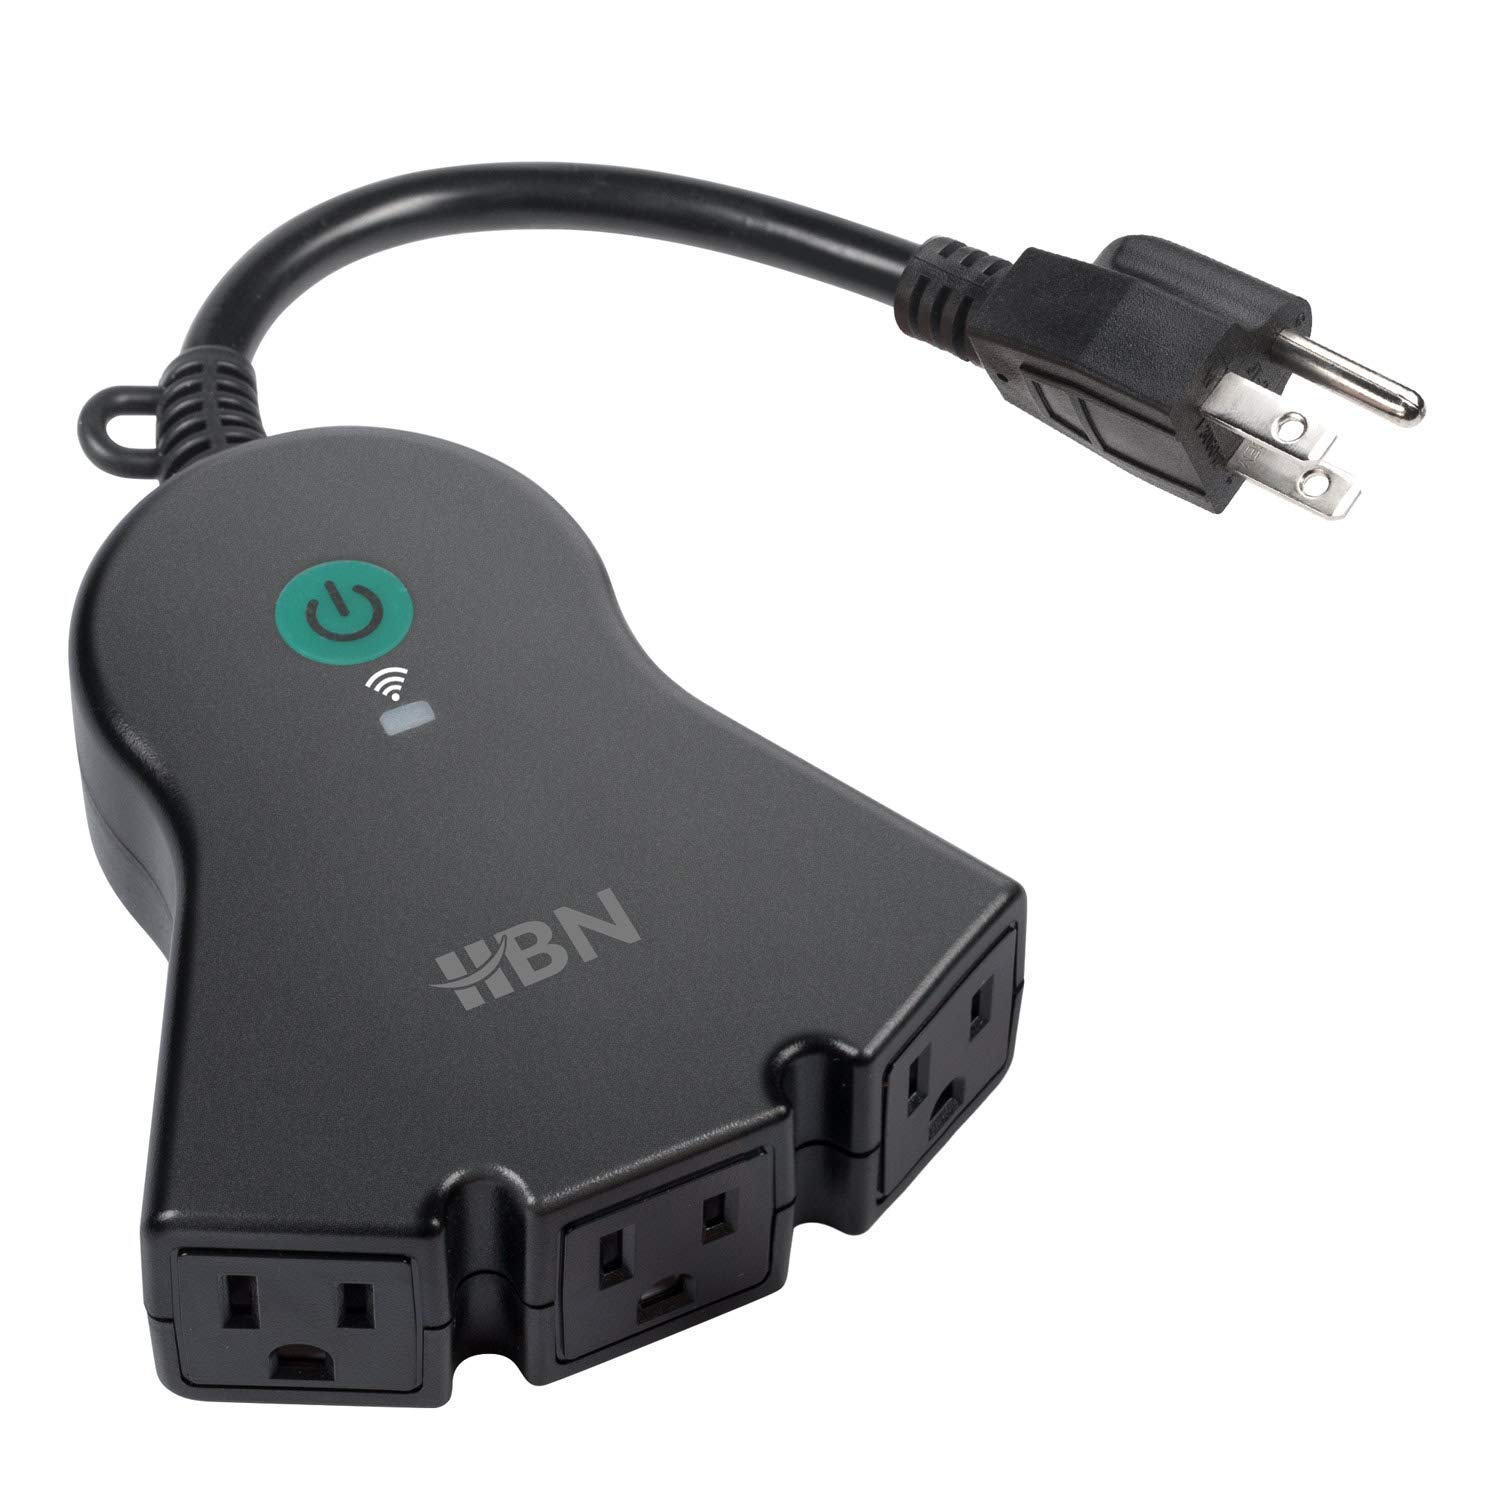 HBN Outdoor Wifi Smart Plug Review